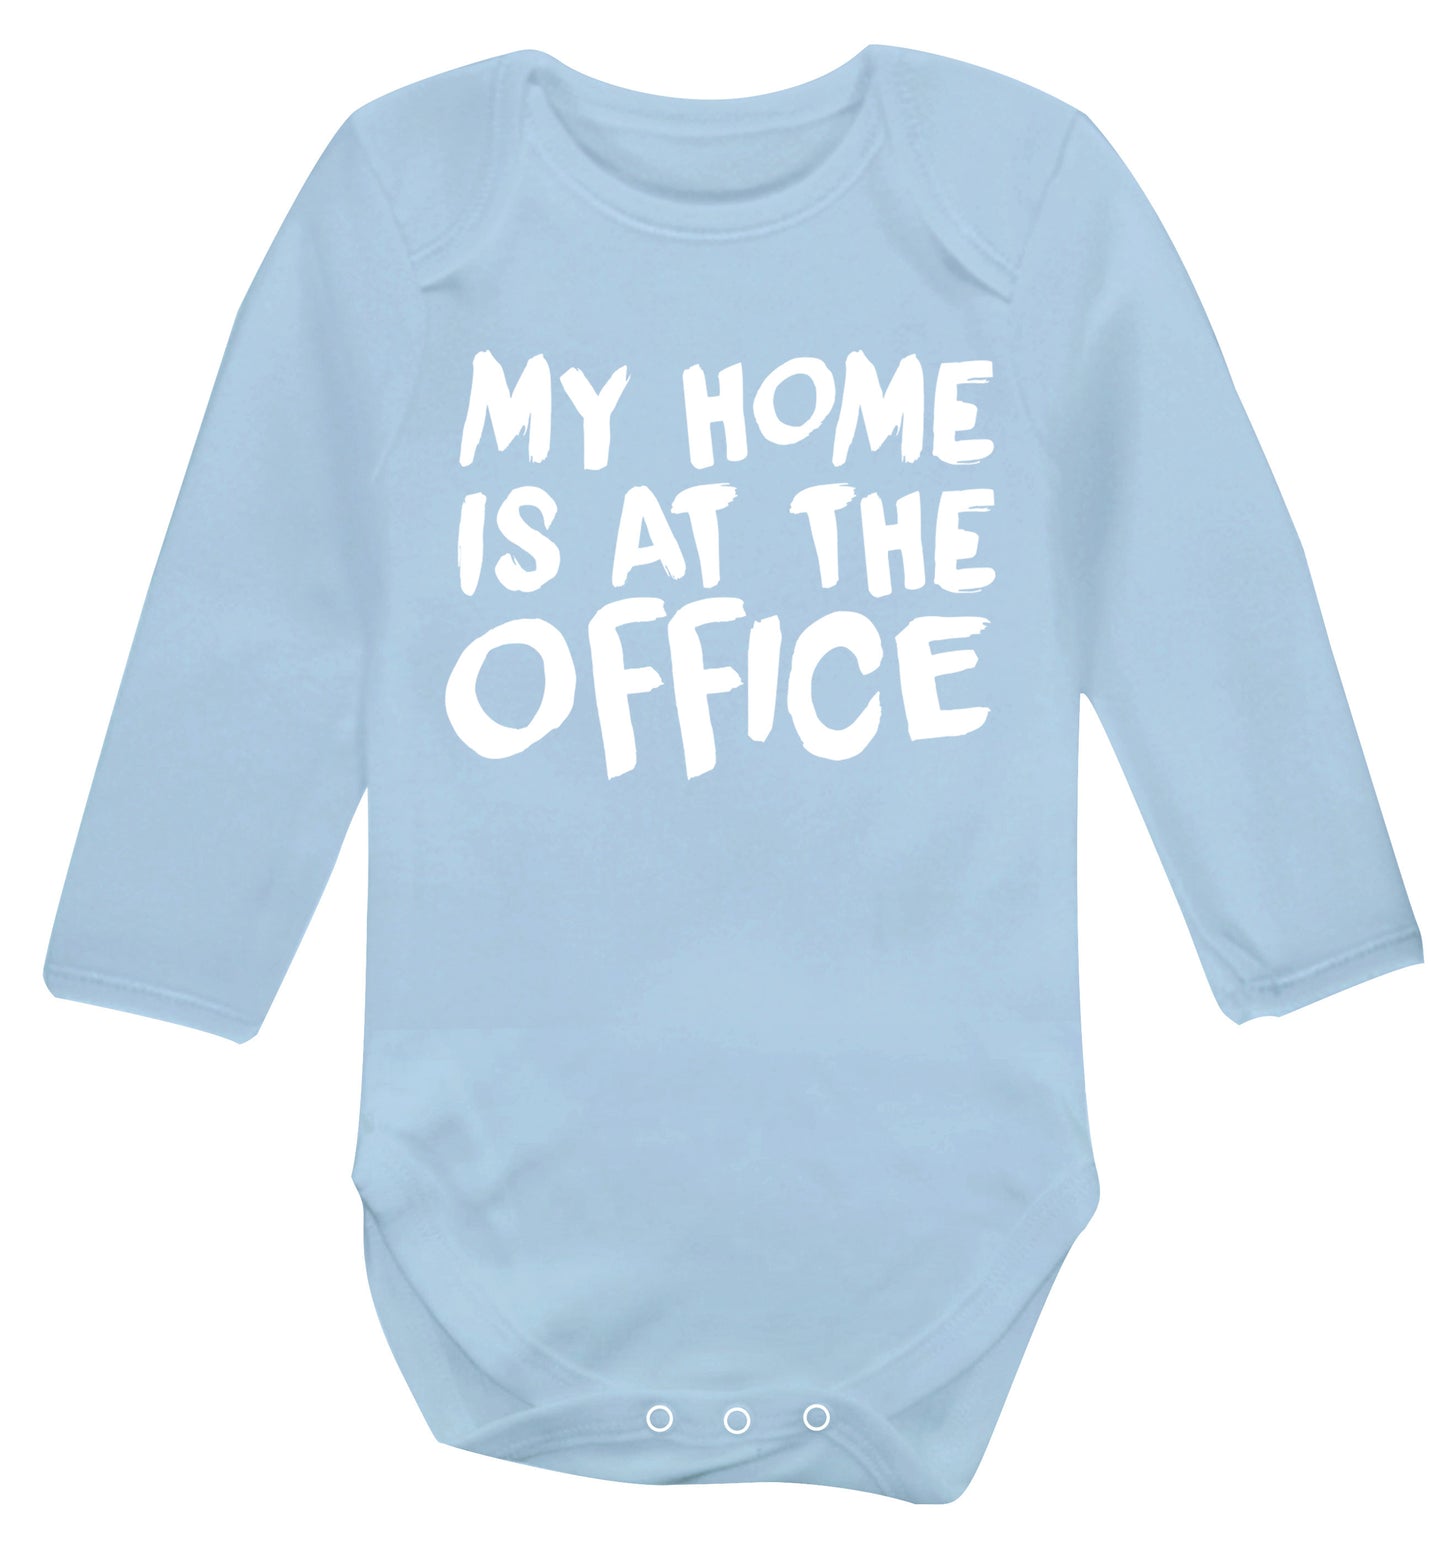 My home is at the office Baby Vest long sleeved pale blue 6-12 months